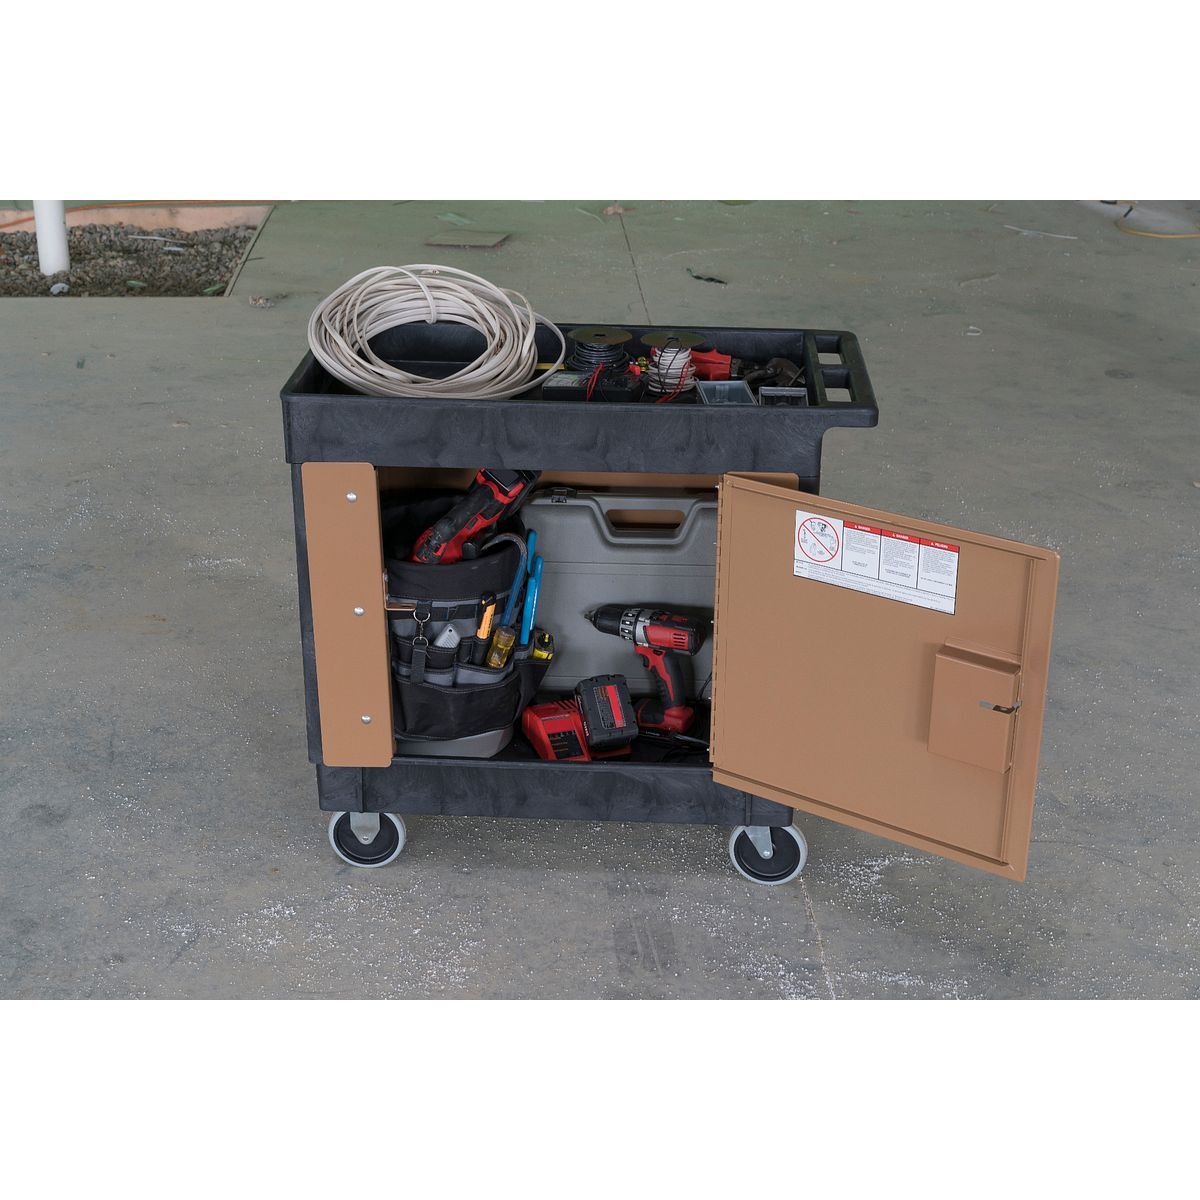 Knaack CA-03 Mobile Cart Security Paneling for sale online